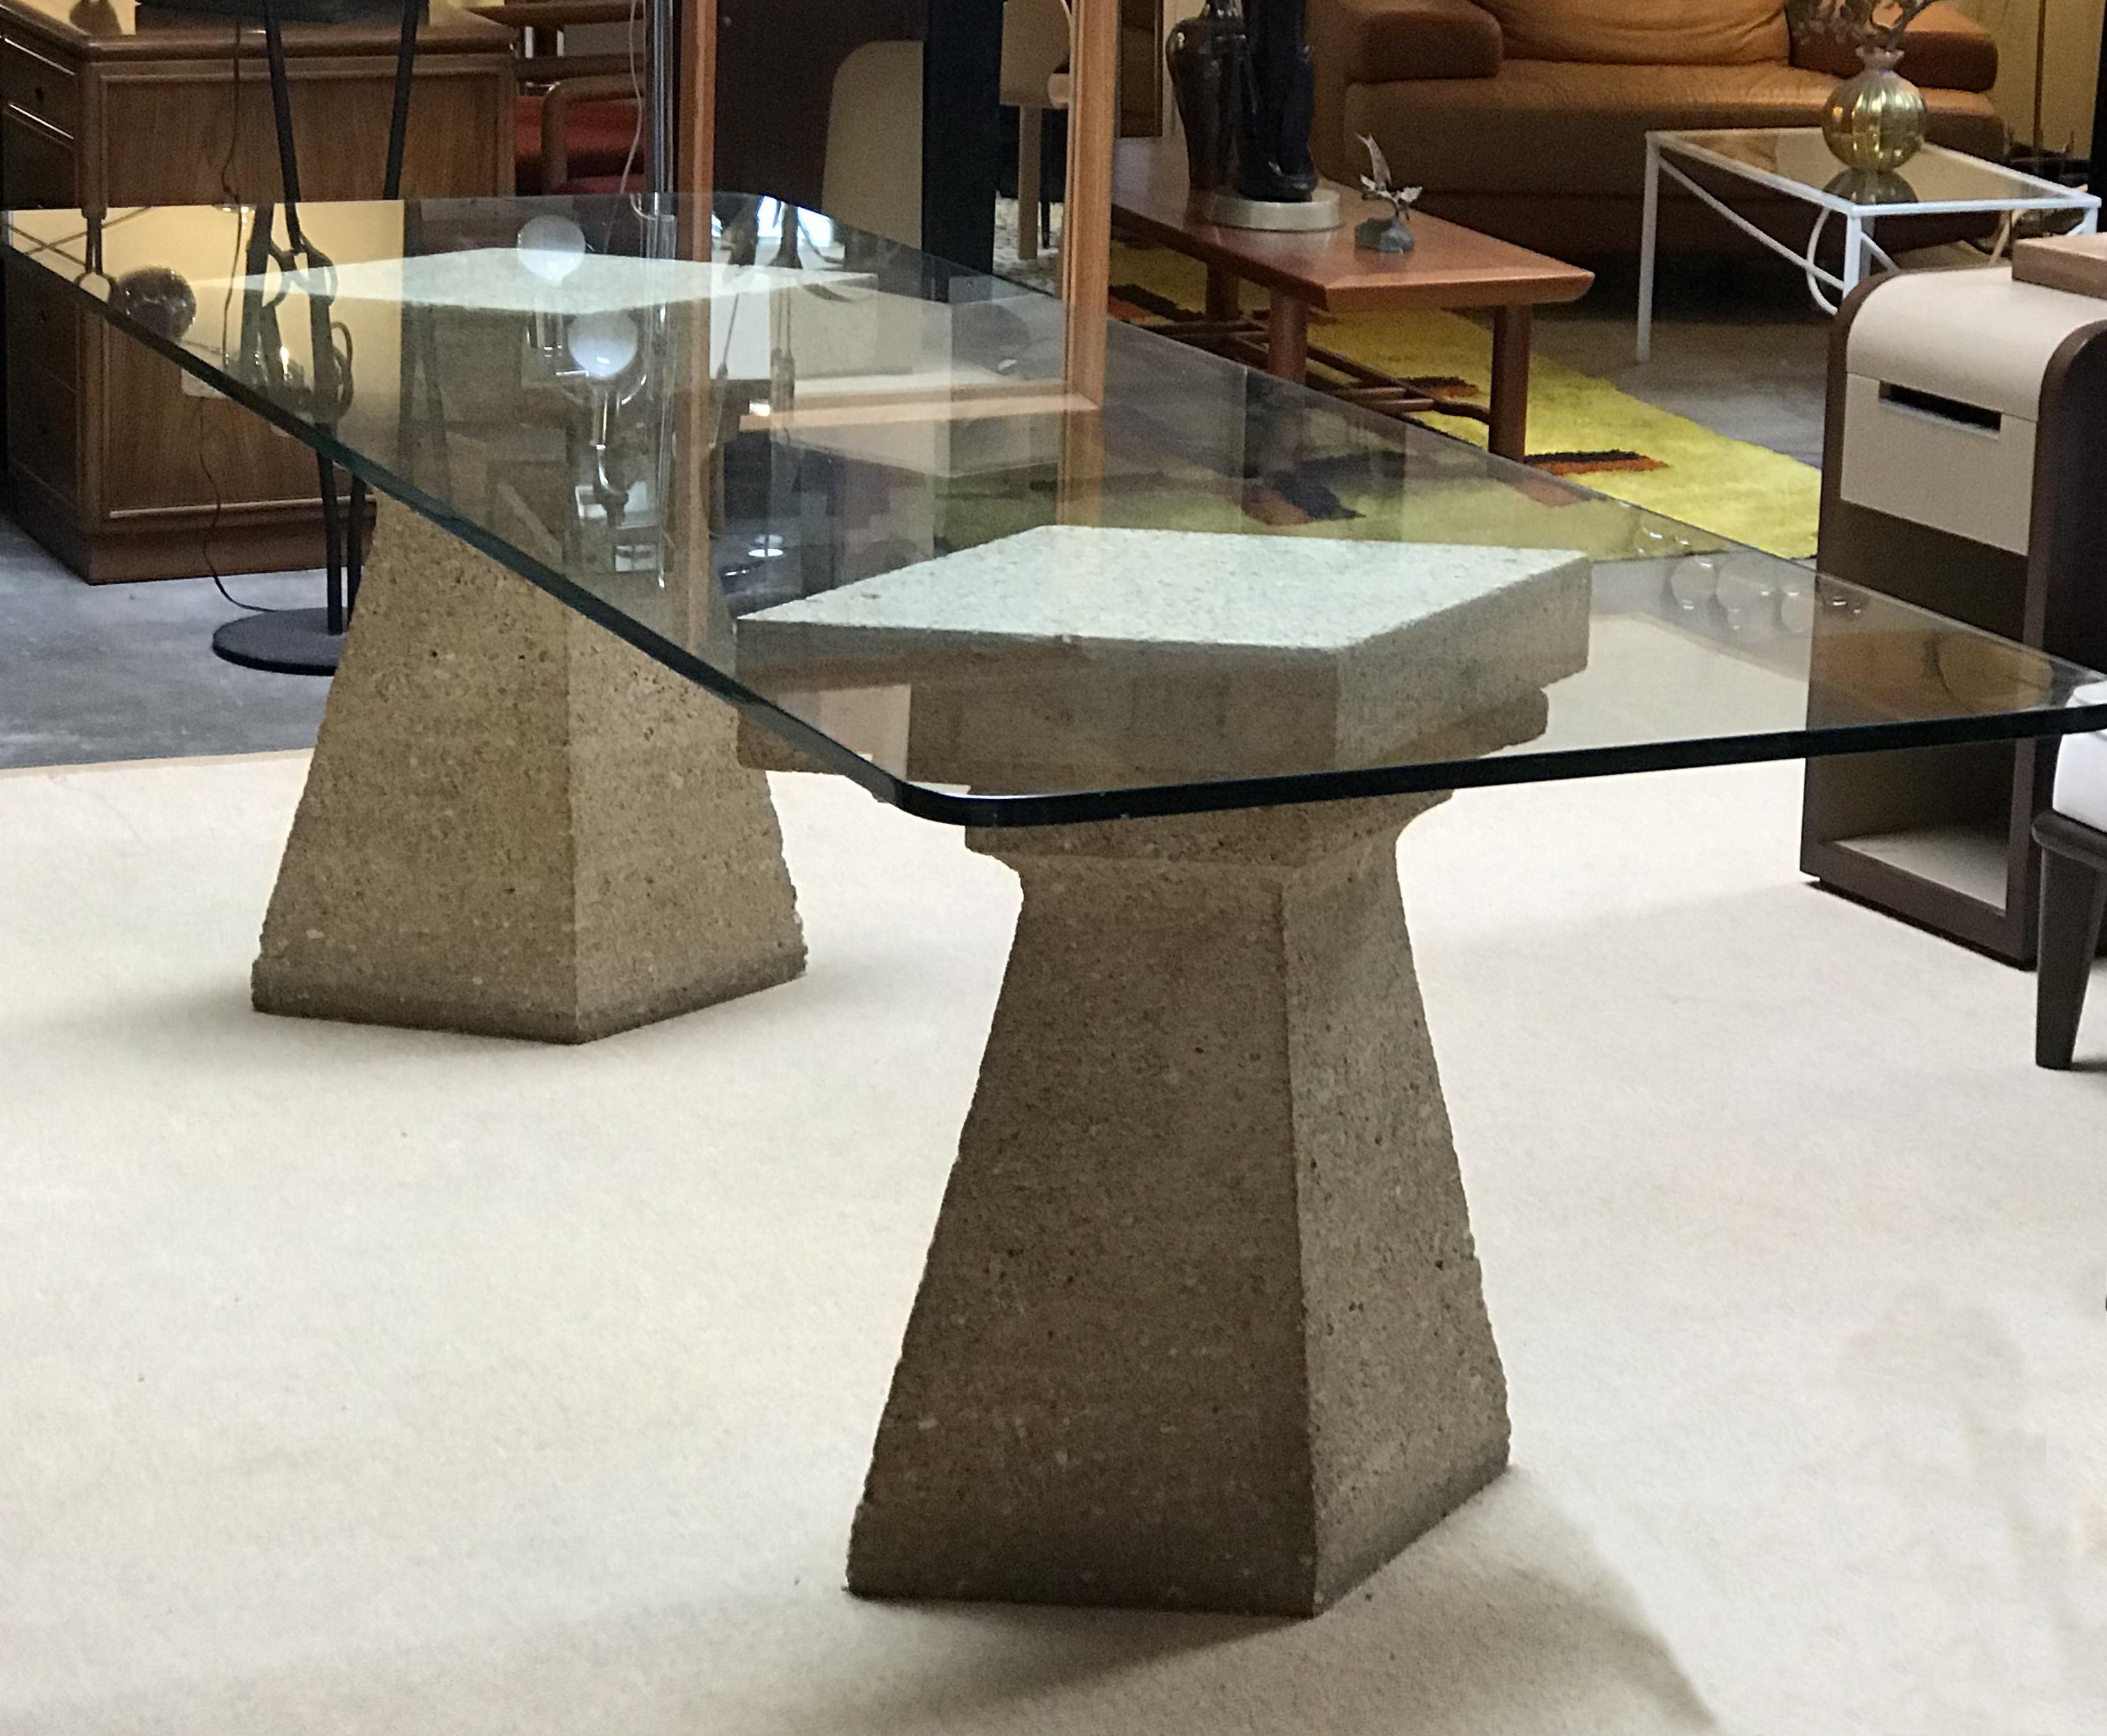 Stunning and unique glass table that rests on two stone lozenge-shaped pedestals.
The glass top has rounded corners and is 1